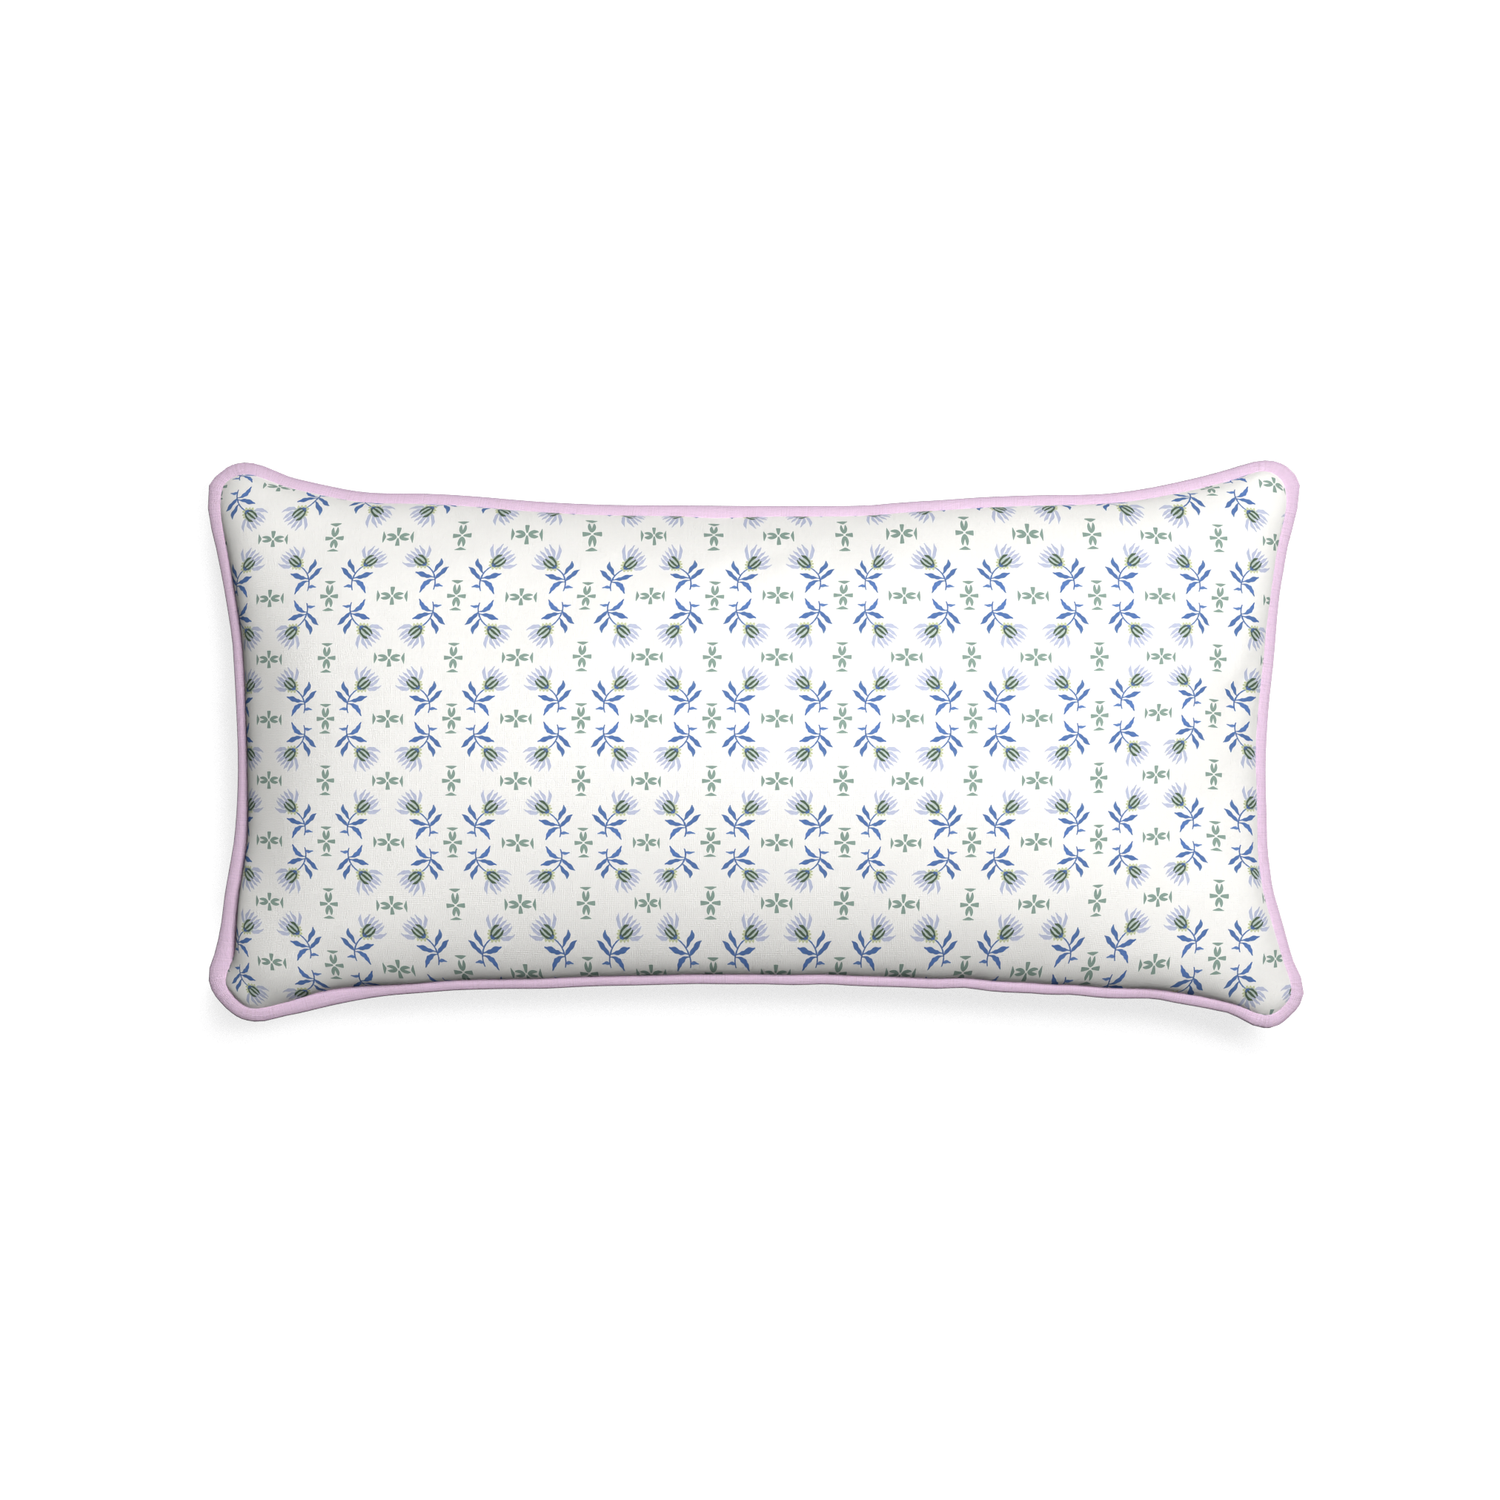 Midi-lumbar lee custom blue & green floralpillow with l piping on white background